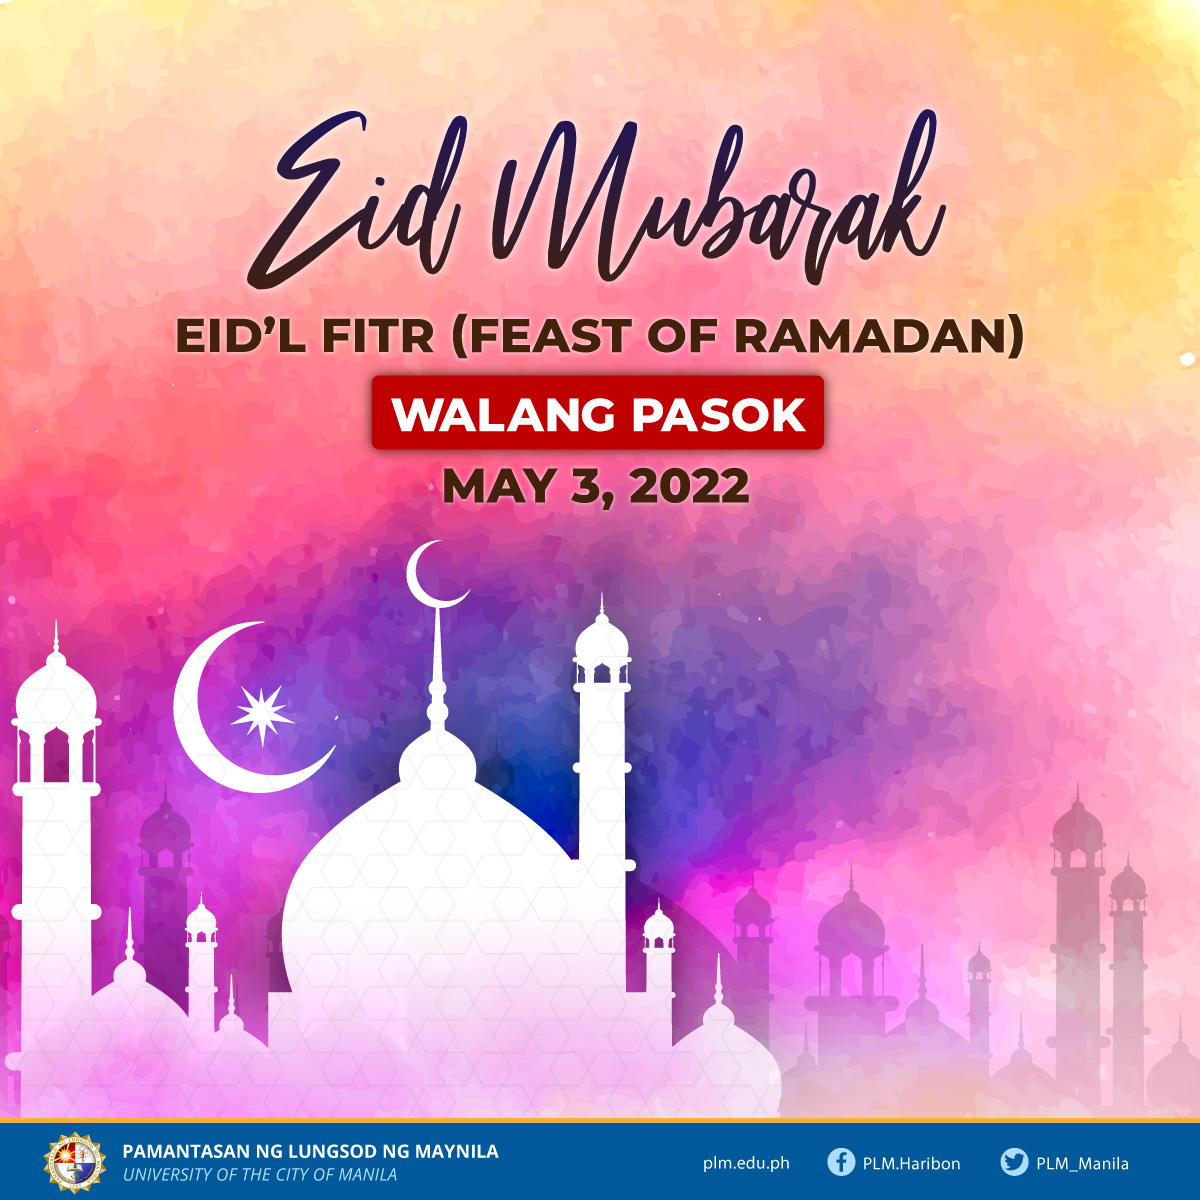 Classes, work suspended on Eid'l Fitr (May 3, 2022)